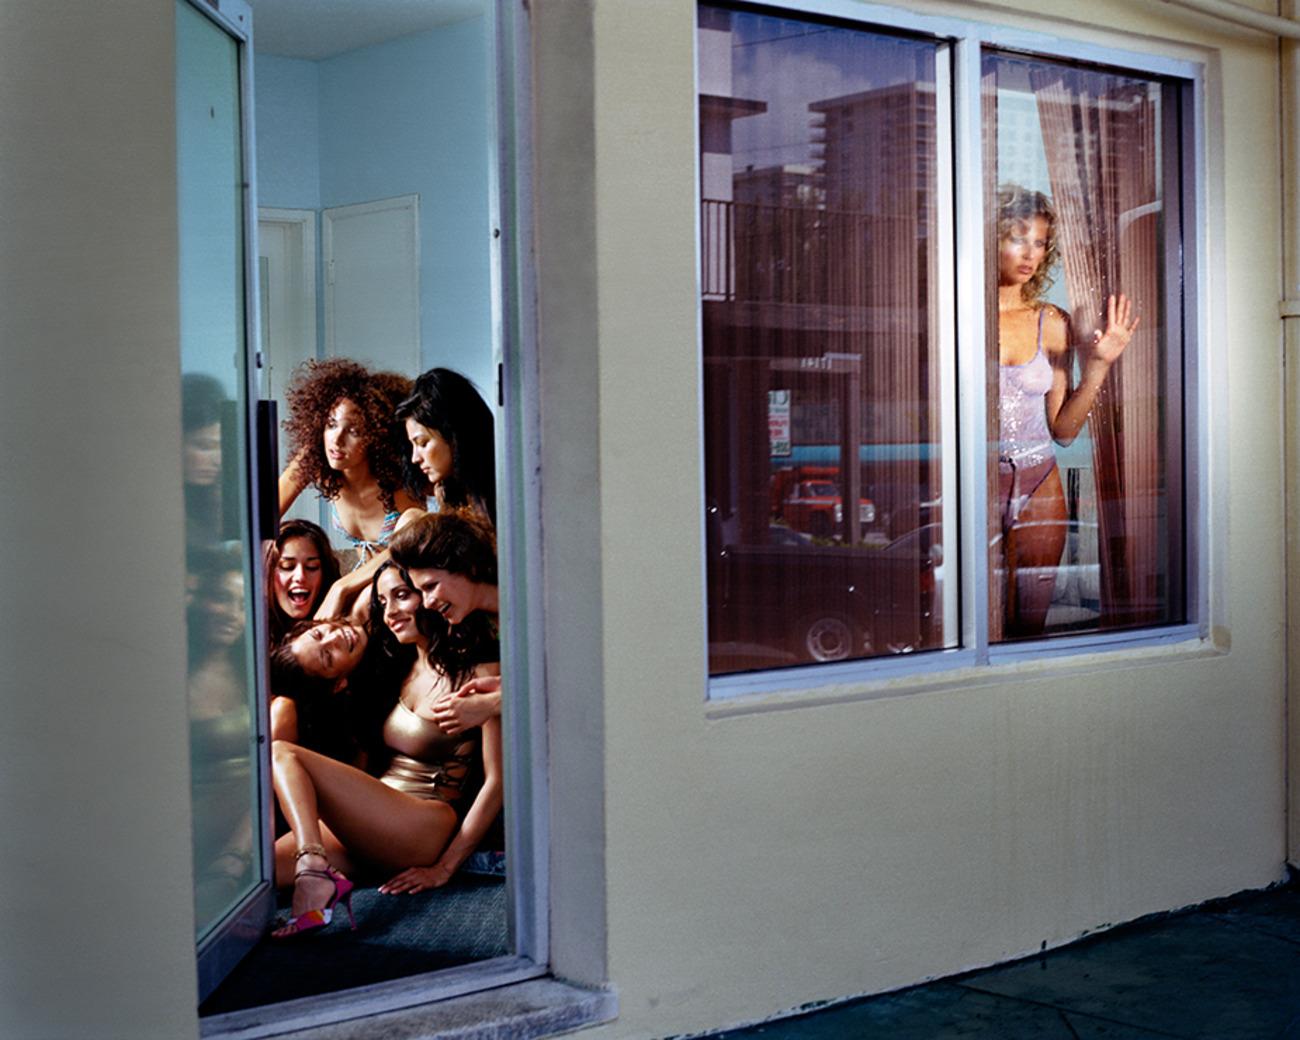 Series: FEMME FATALE
All available sizes & editions for each size of this photograph:
30" X 37.5"- Edition of 10
48" X 60"- Edition of 7
48" X 60" - Edition of 3; Lightbox

In a unique manner, David Drebin’s work combines voyeuristic and